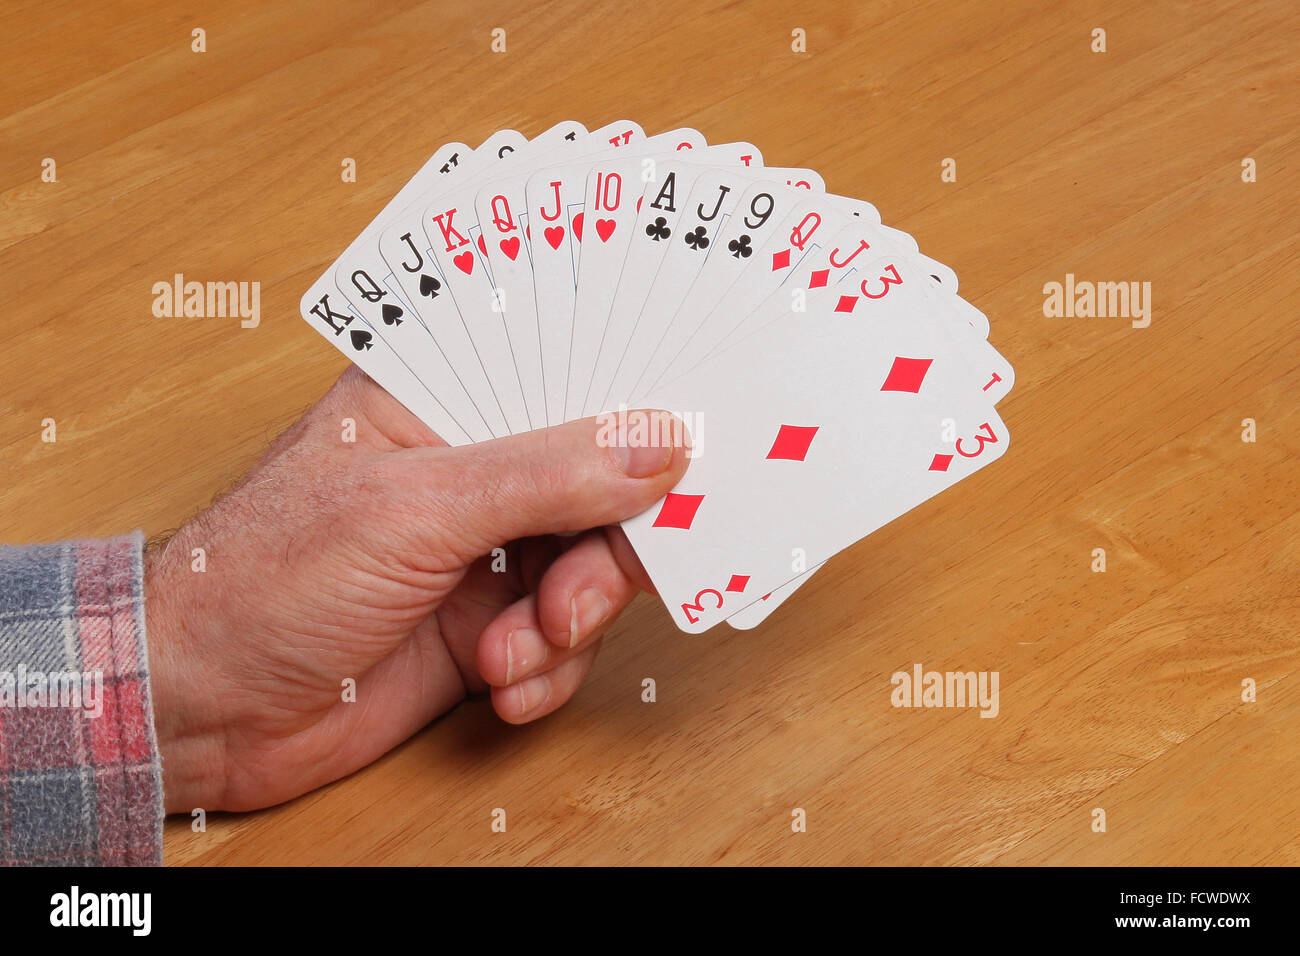 ACOL Contract Bridge Hand. With 20 - 22 points and a balanced hand open the bidding 2NT. Stock Photo